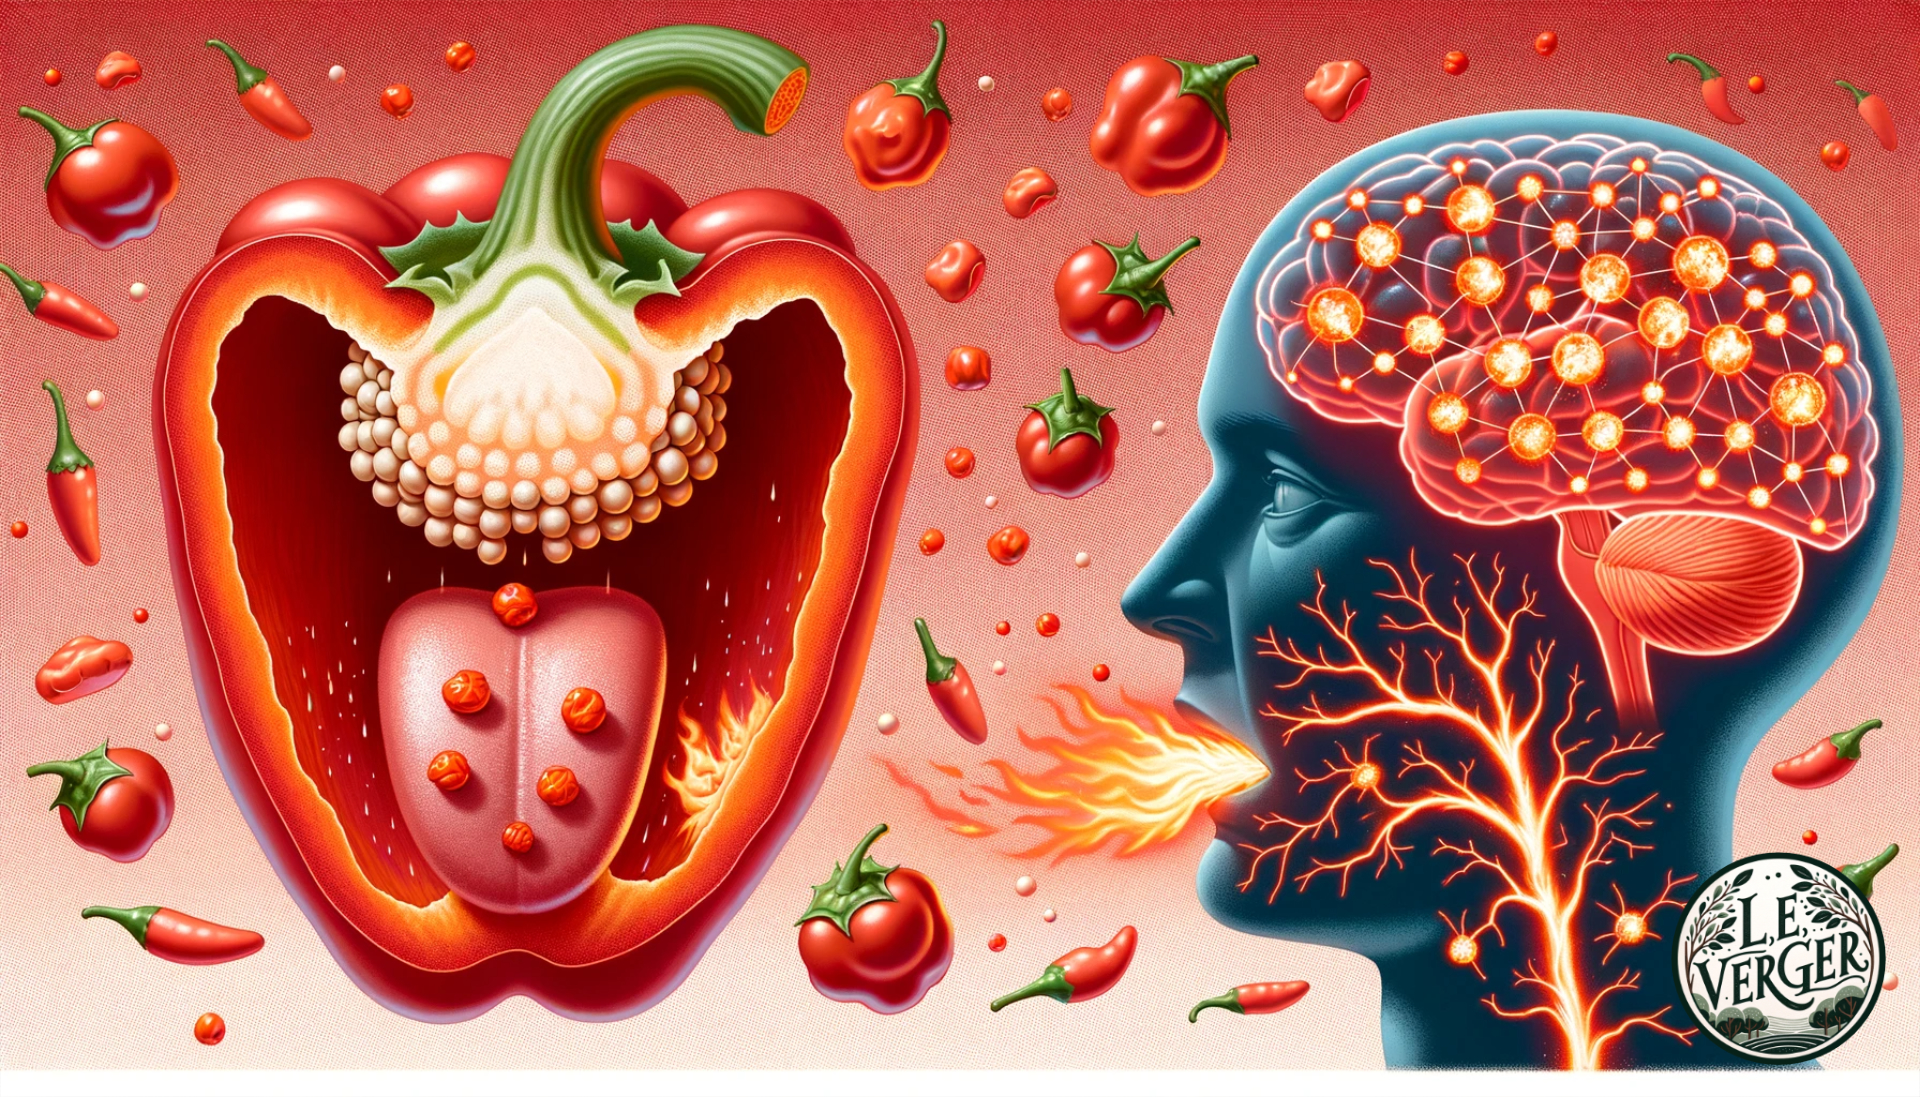 Wide illustration showing a close-up of a pepper's inner section, with capsaicin molecules floating around. There are taste buds on a tongue nearby, and the capsaicin molecules are interacting with them, creating small fiery animations. Above, a brain receives these signals, visualised by fiery synapses and neural connections, representing the sensation of heat.